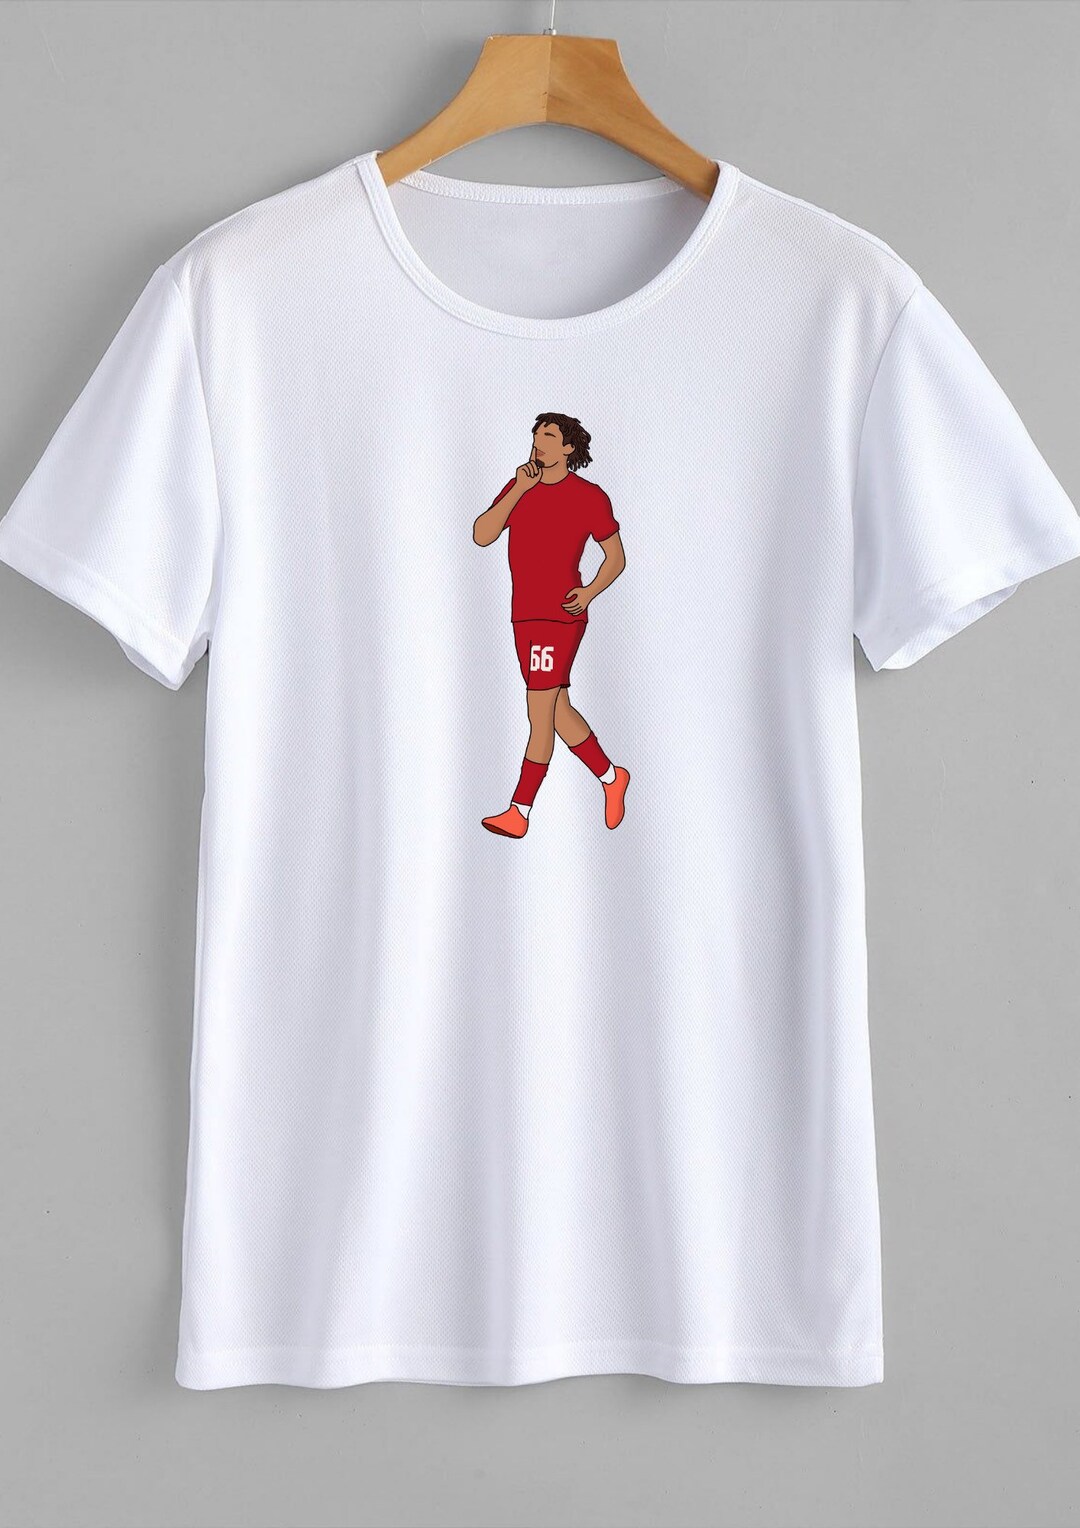 Trent Alexander Arnold Liverpool FC T-shirt we Advise to Size - Etsy